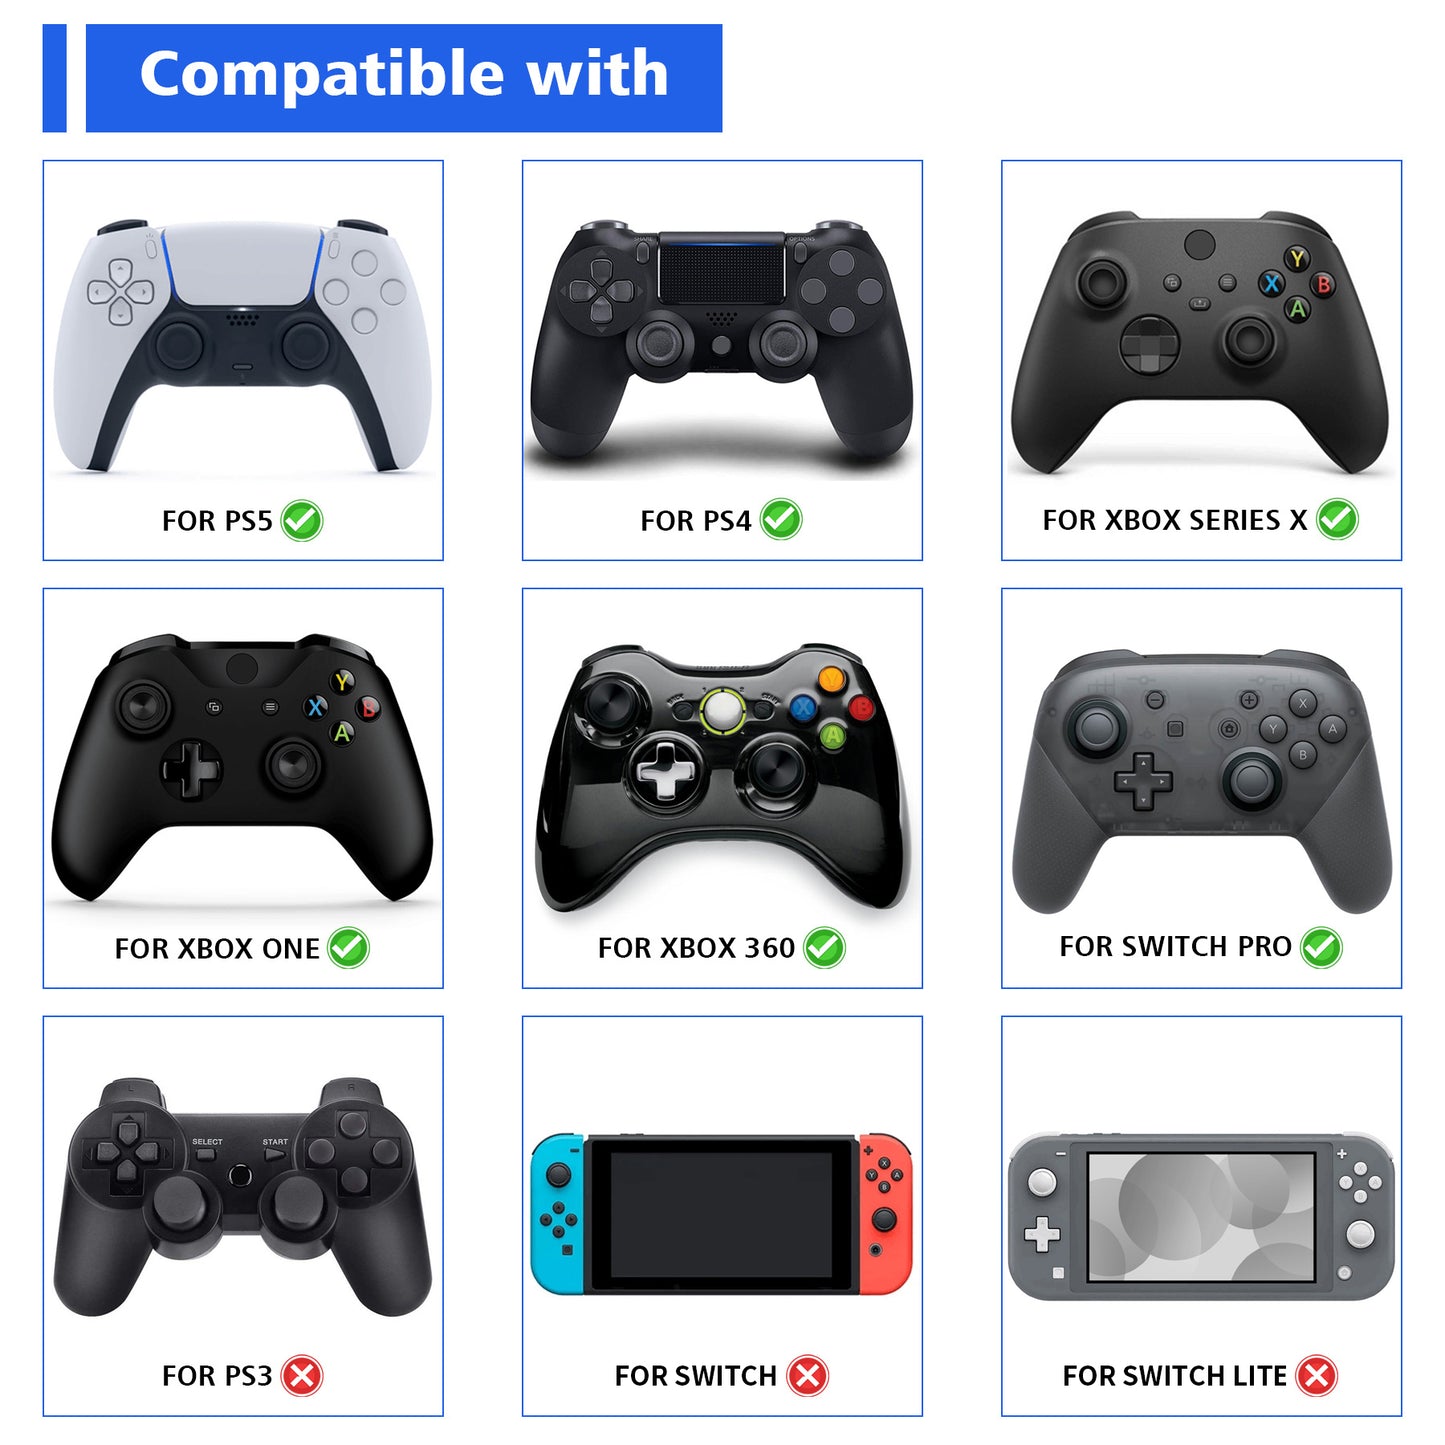 PlayVital Husky & Kitty Cute Thumb Grip Caps for PS5/4 Controller, Silicone Analog Stick Caps Cover for Xbox Series X/S, Thumbstick Caps for Switch Pro Controller - Navy Blue & Light Gray - PJM2038 PlayVital